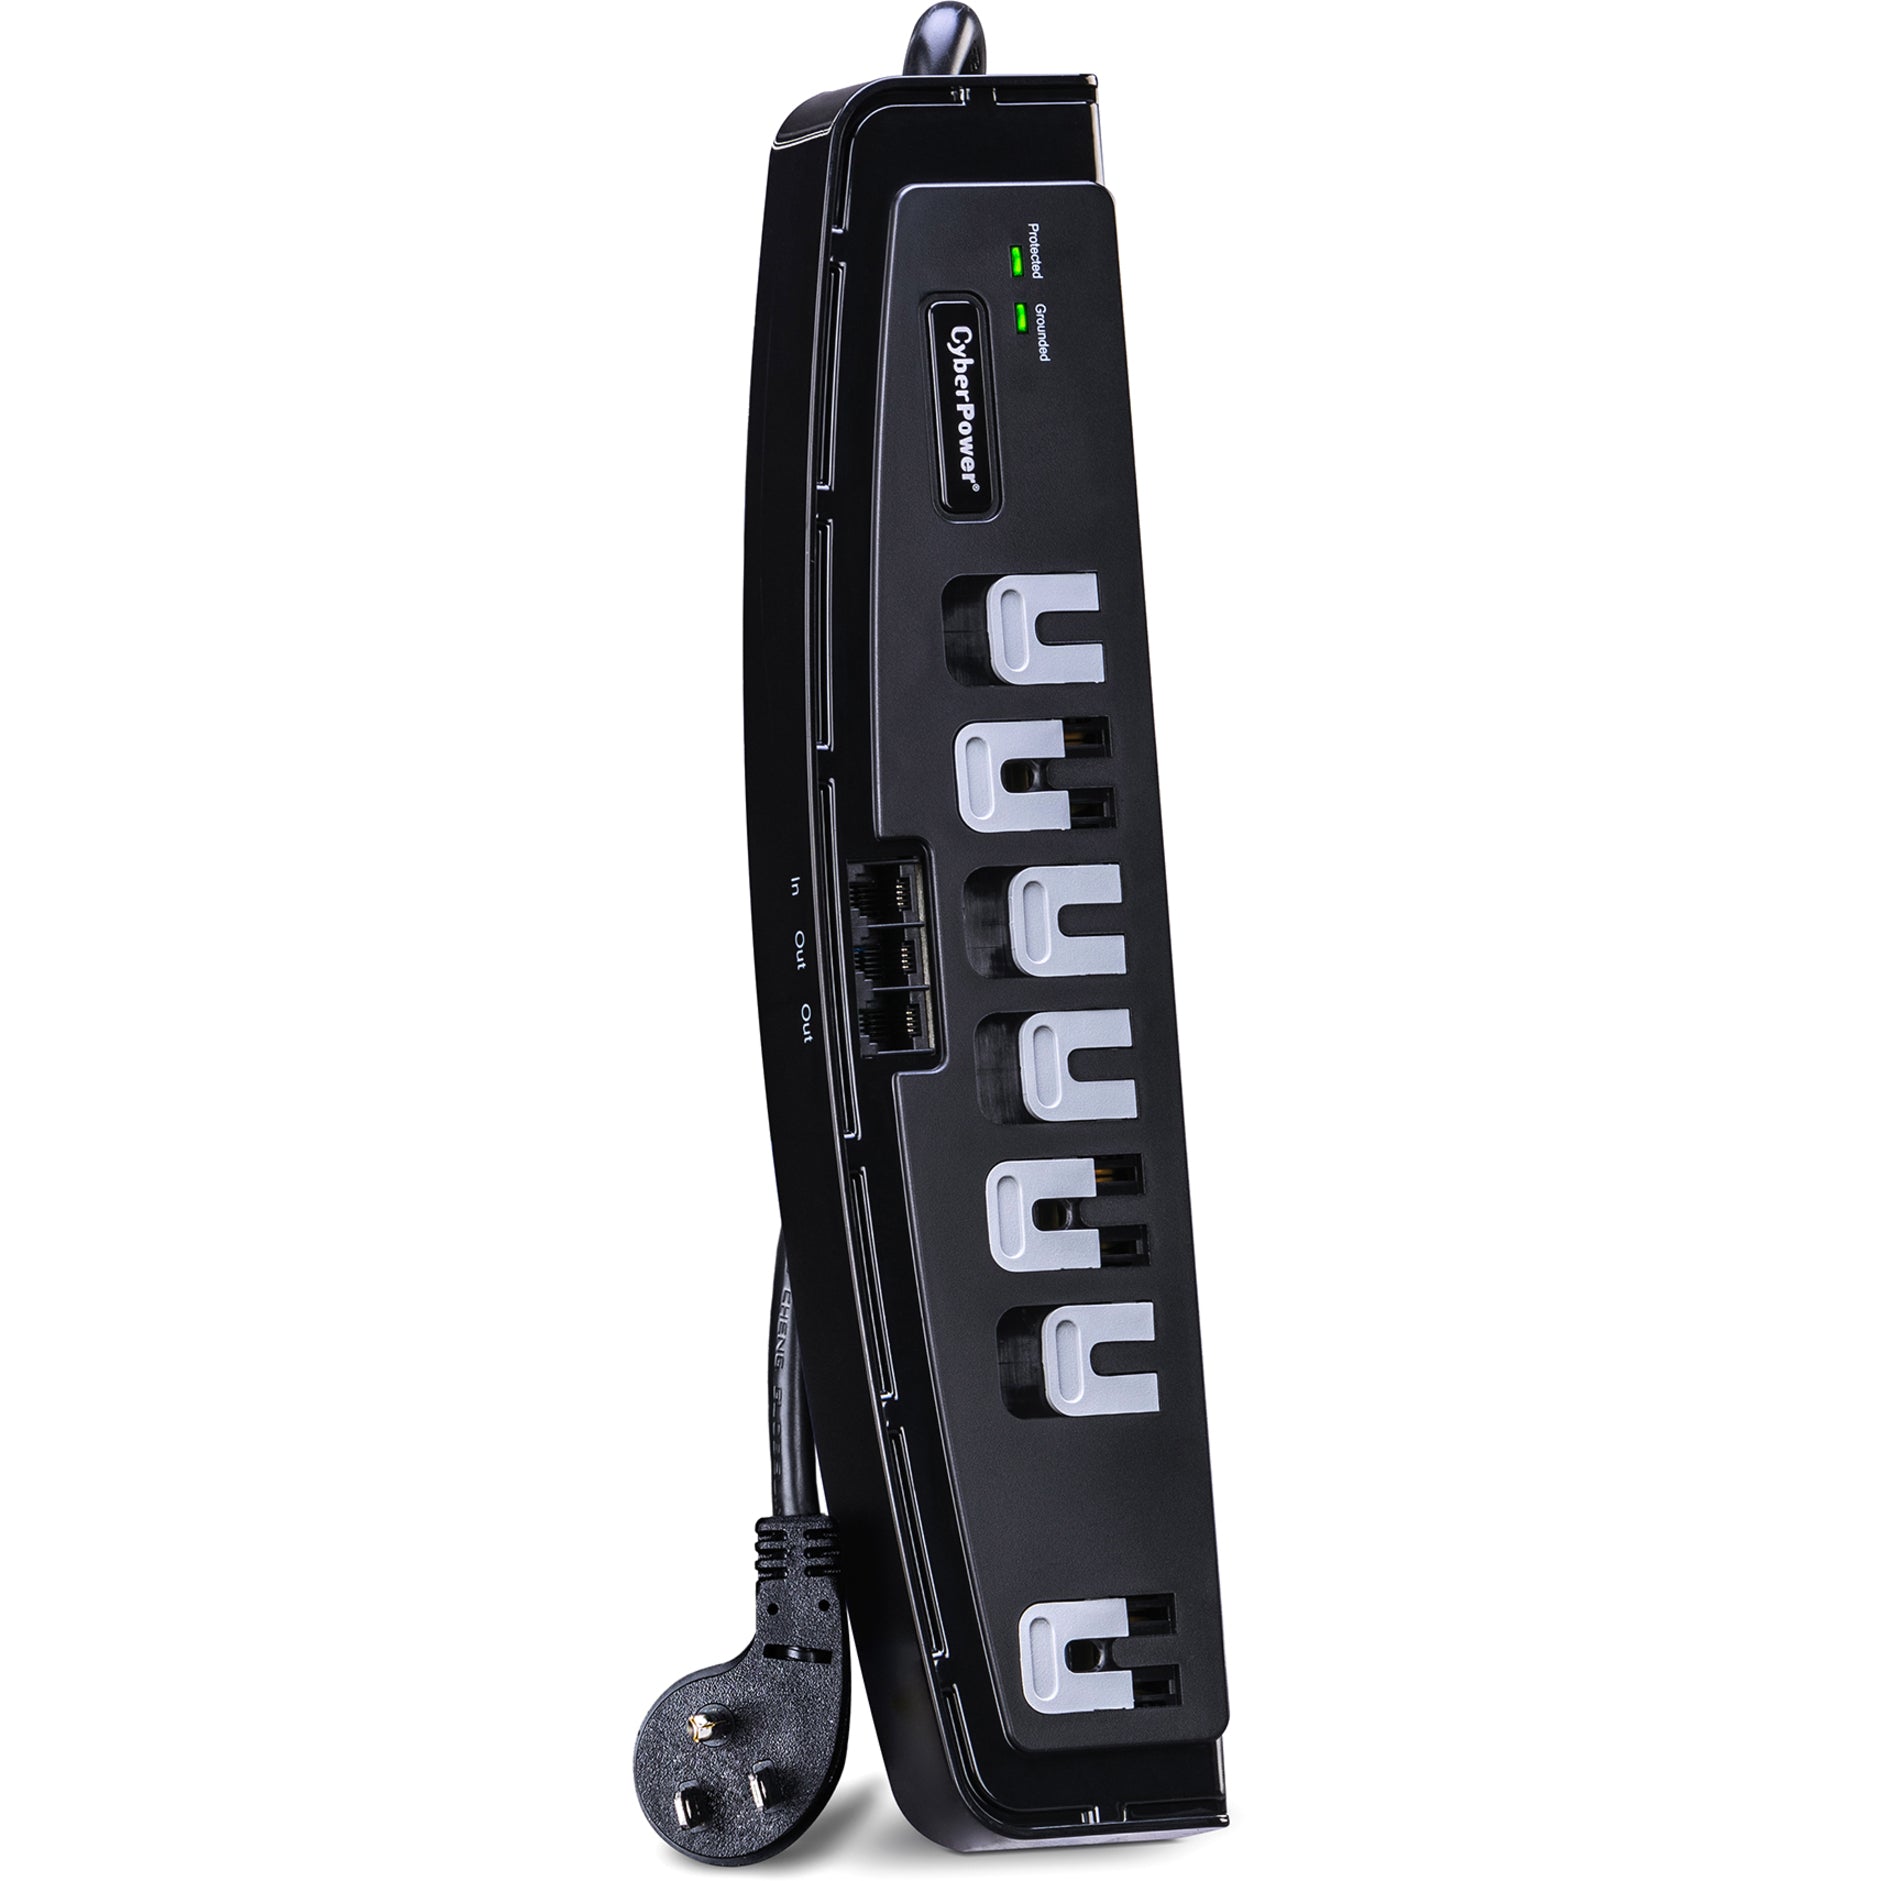 CyberPower Professional 7-Outlet Surge Suppressor with 1650 J [Discontinued]